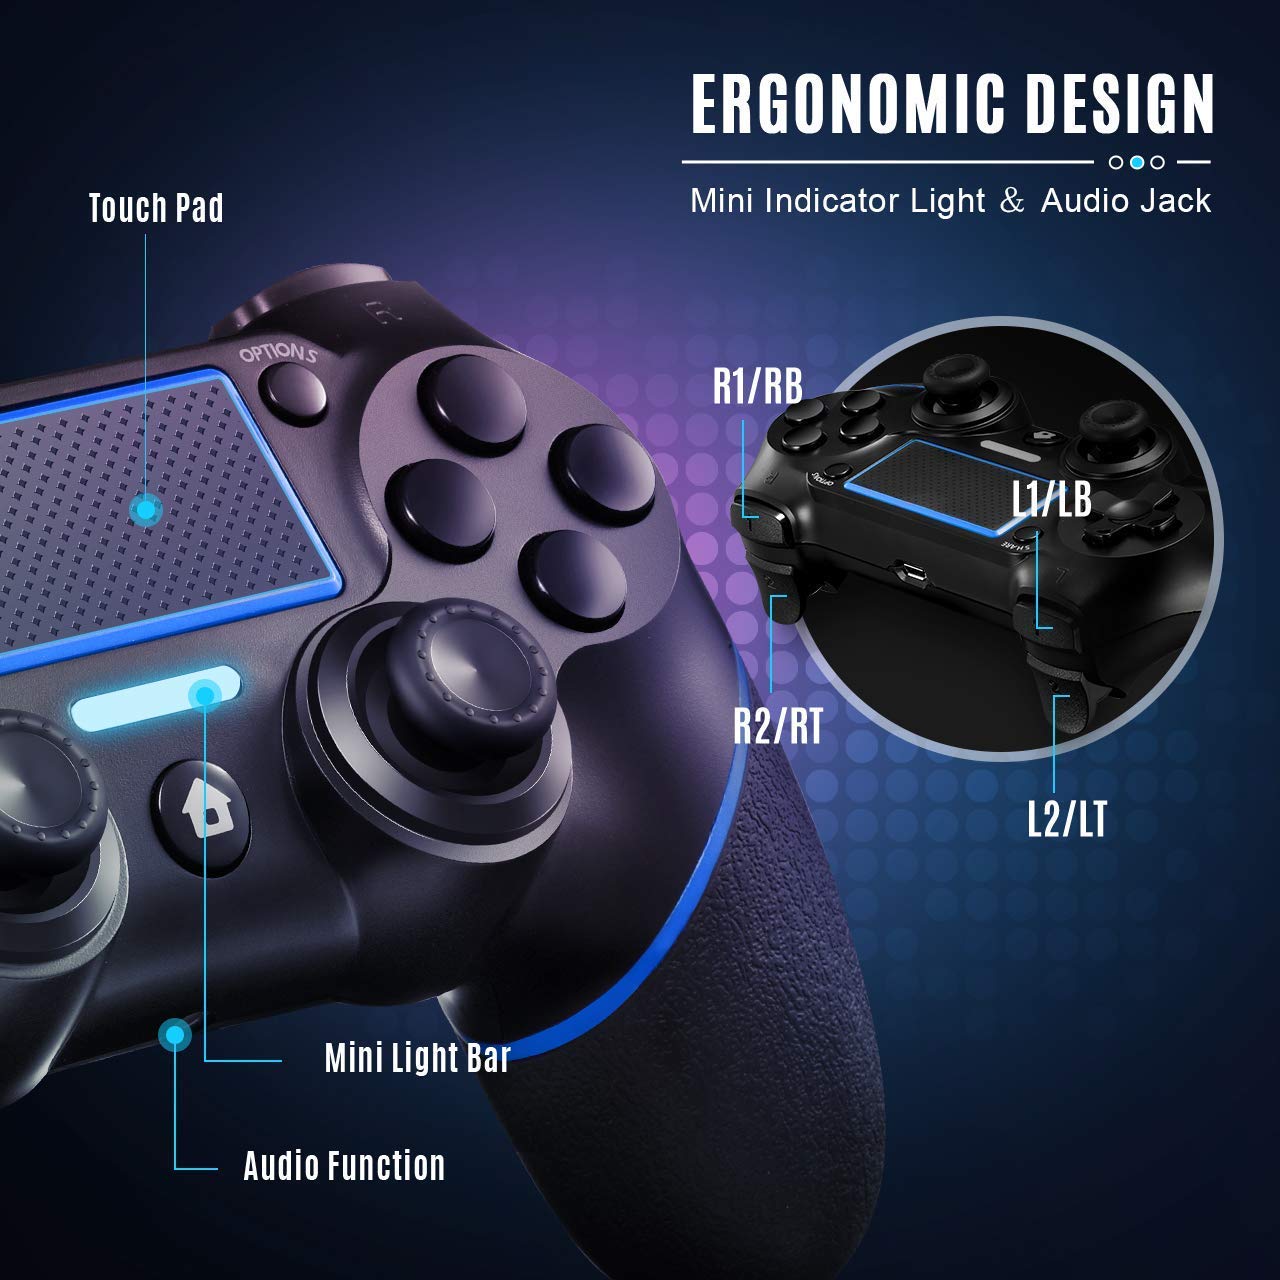 Mini LED Indicator ORDA Controller Wireless Gamepad Compatible with PS4/Pro/PC with Motion Motors and Audio Function Red USB Cable and Anti-Slip 【Upgraded Version】 